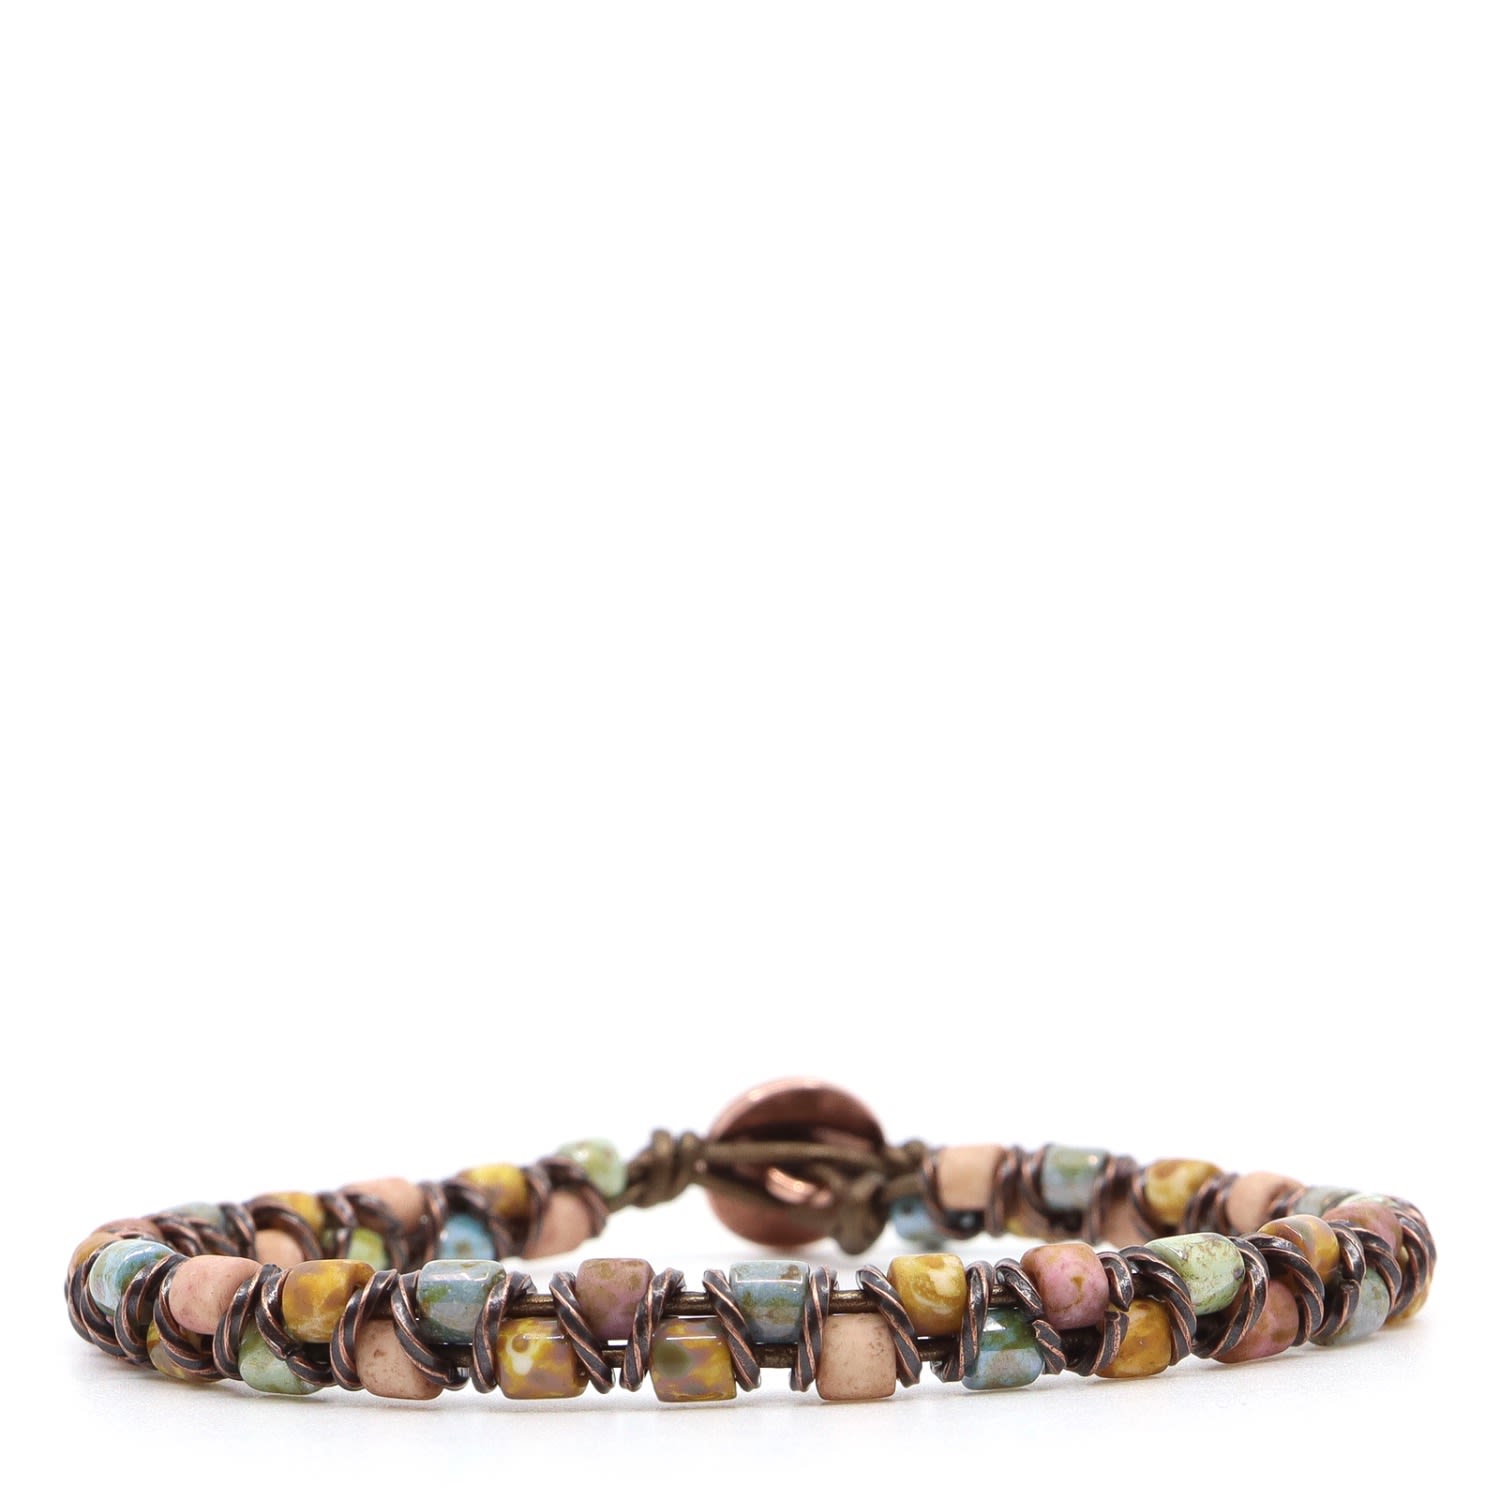 Men’s Rose Gold Peach, Teal & Yellow Picasso Czech Beads & Brown Leather Beaded Bracelet Shar Oke